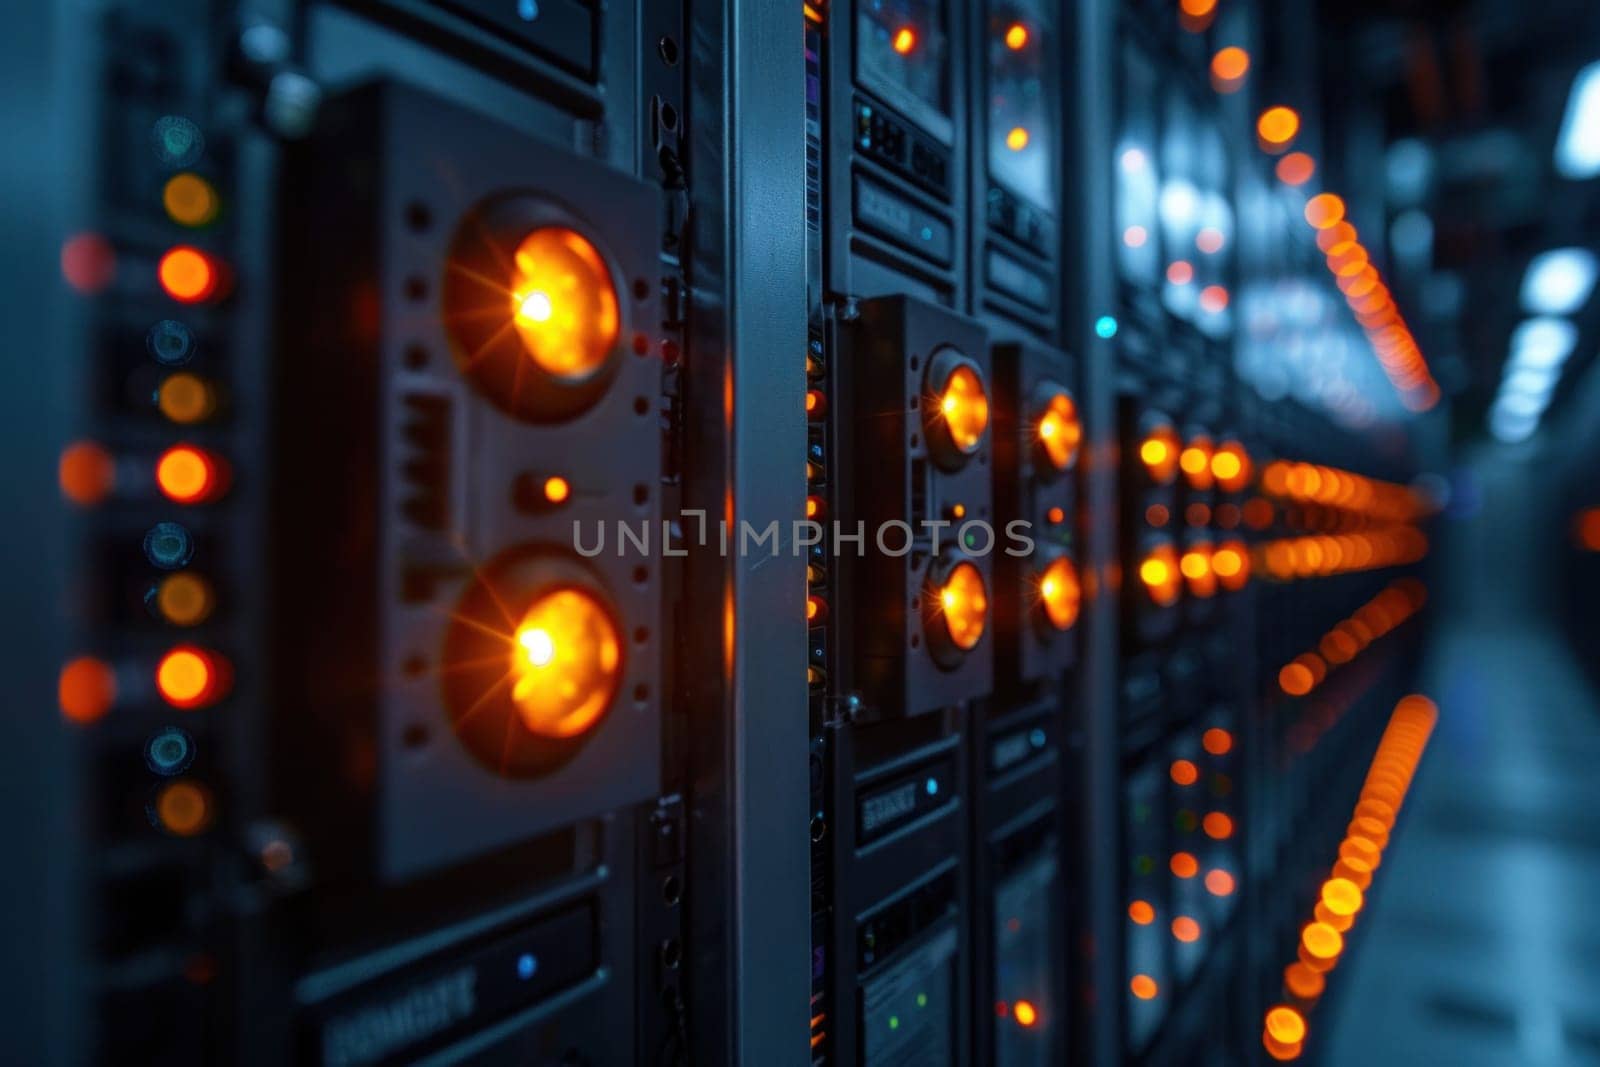 Array of Servers in Data Center by but_photo